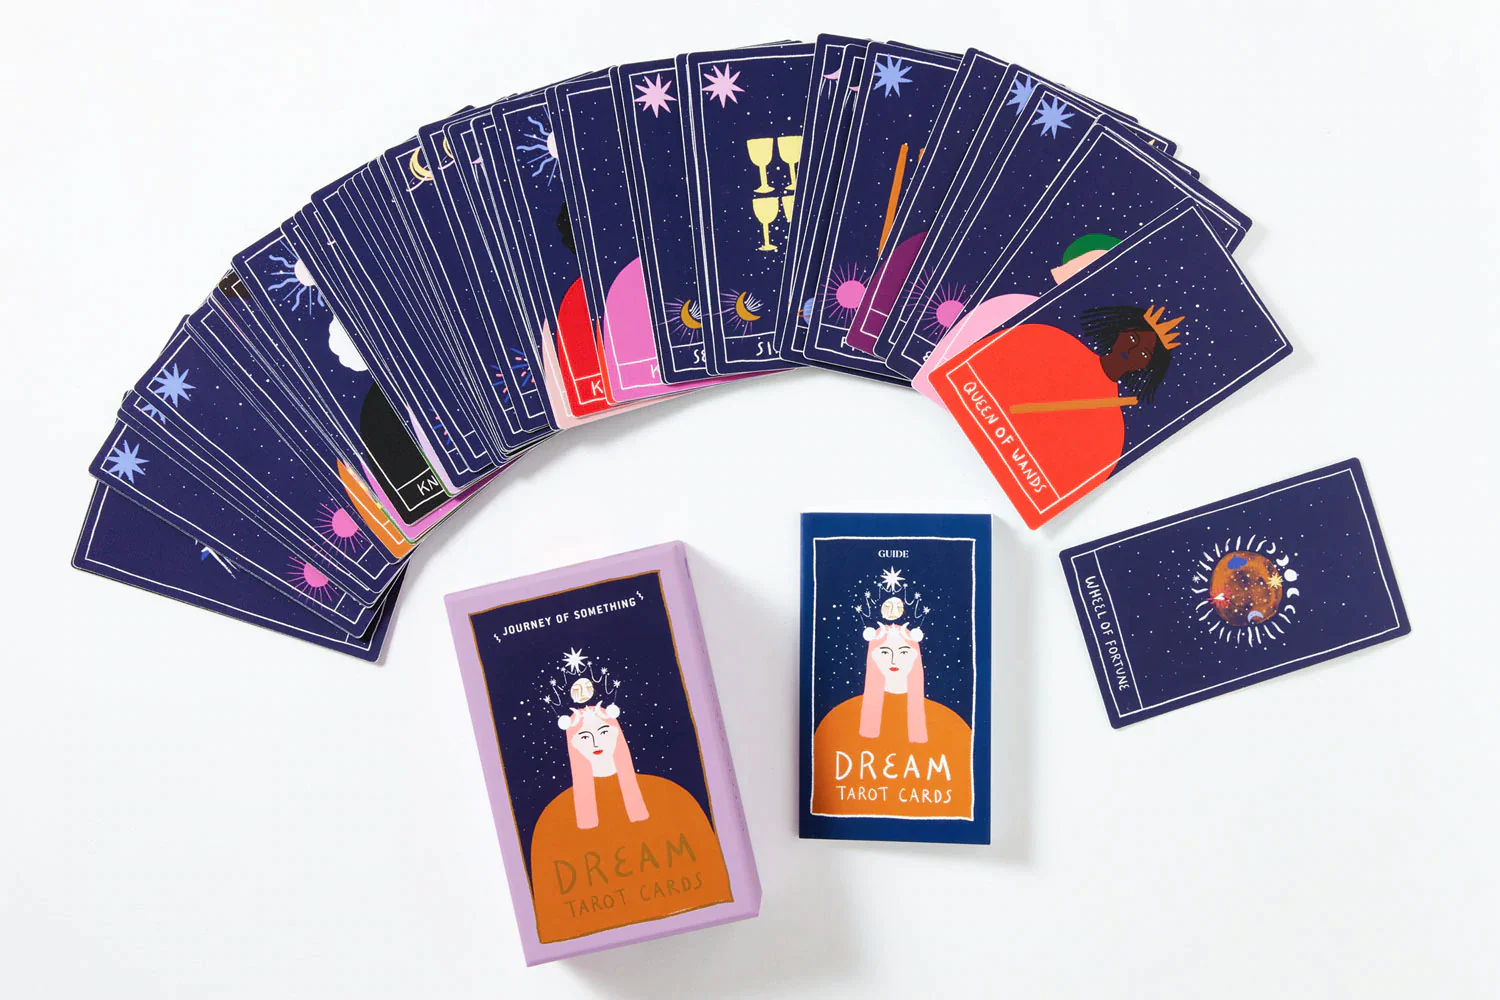 Journey Of Something Dream Tarot Cards and Guide